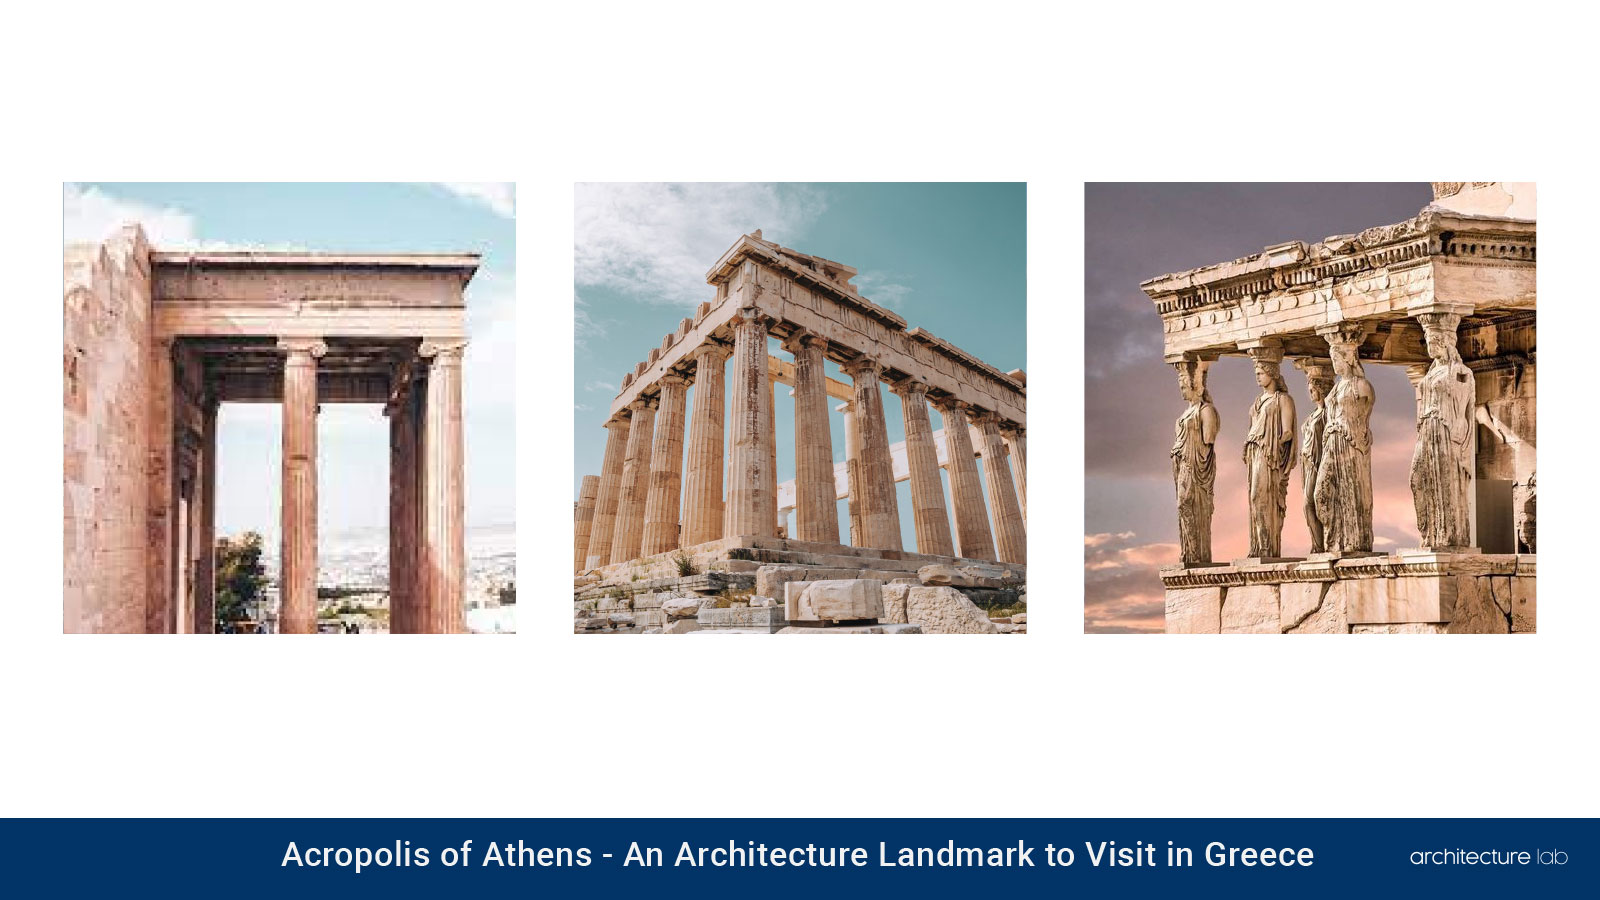 Acropolis of athens: an architecture landmark to visit in greece